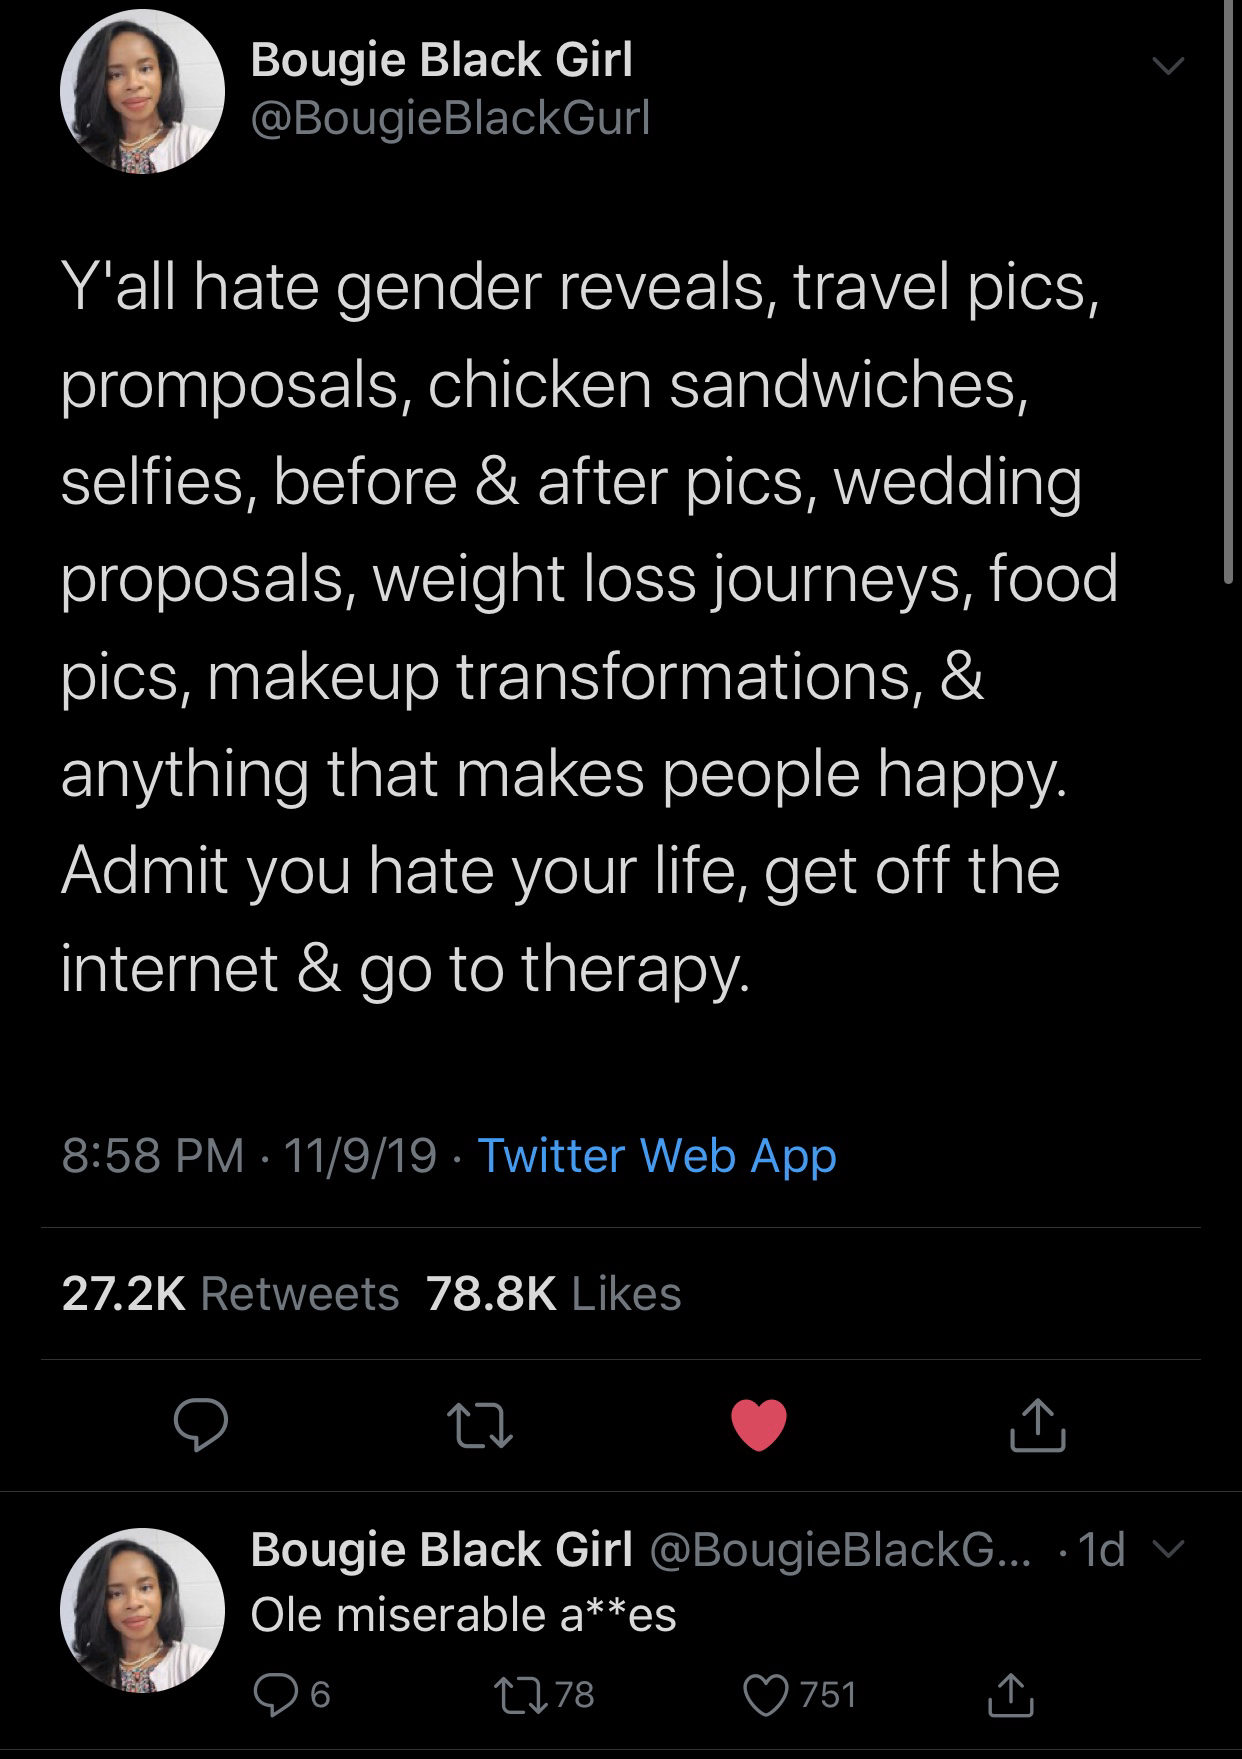 black twitter -  Bougie Black Girl Y'all hate gender reveals, travel pics, promposals, chicken sandwiches, selfies, before & after pics, wedding proposals, weight loss journeys, food, pics, makeup transformations, & anything that makes people happy. Admit